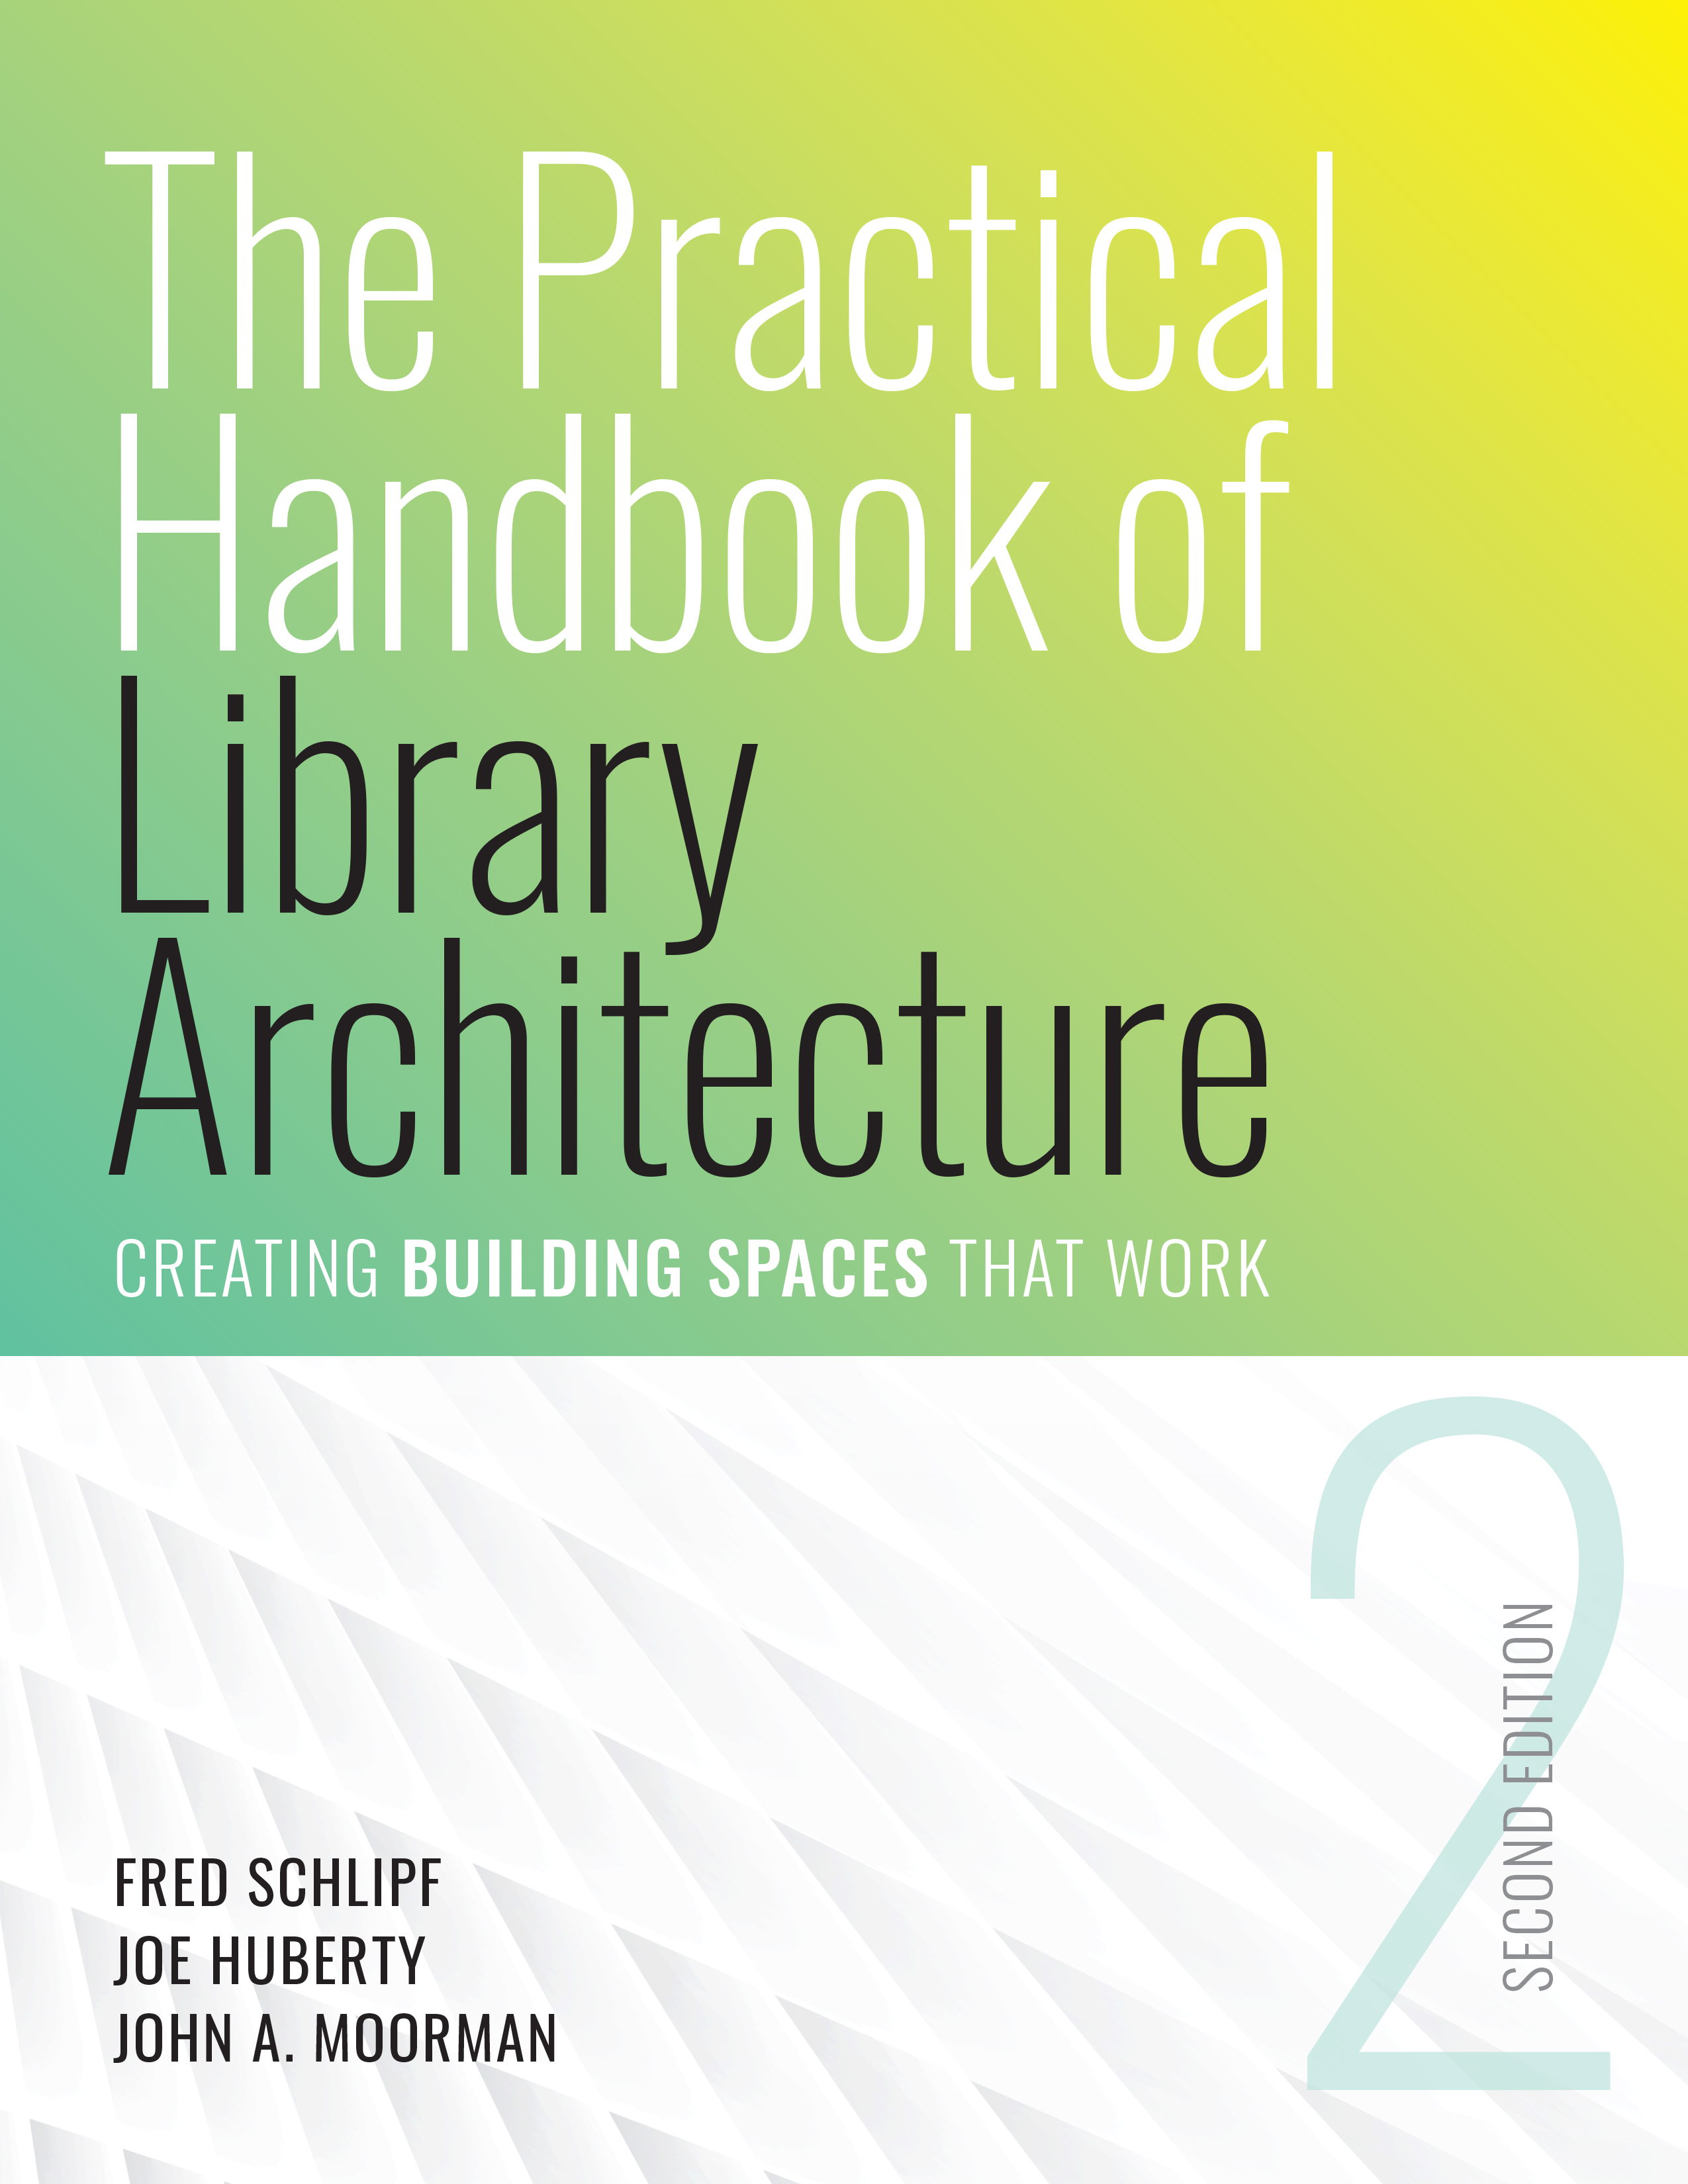 book cover for The Practical Handbook of Library Architecture: Creating Building Spaces that Work, Second Edition